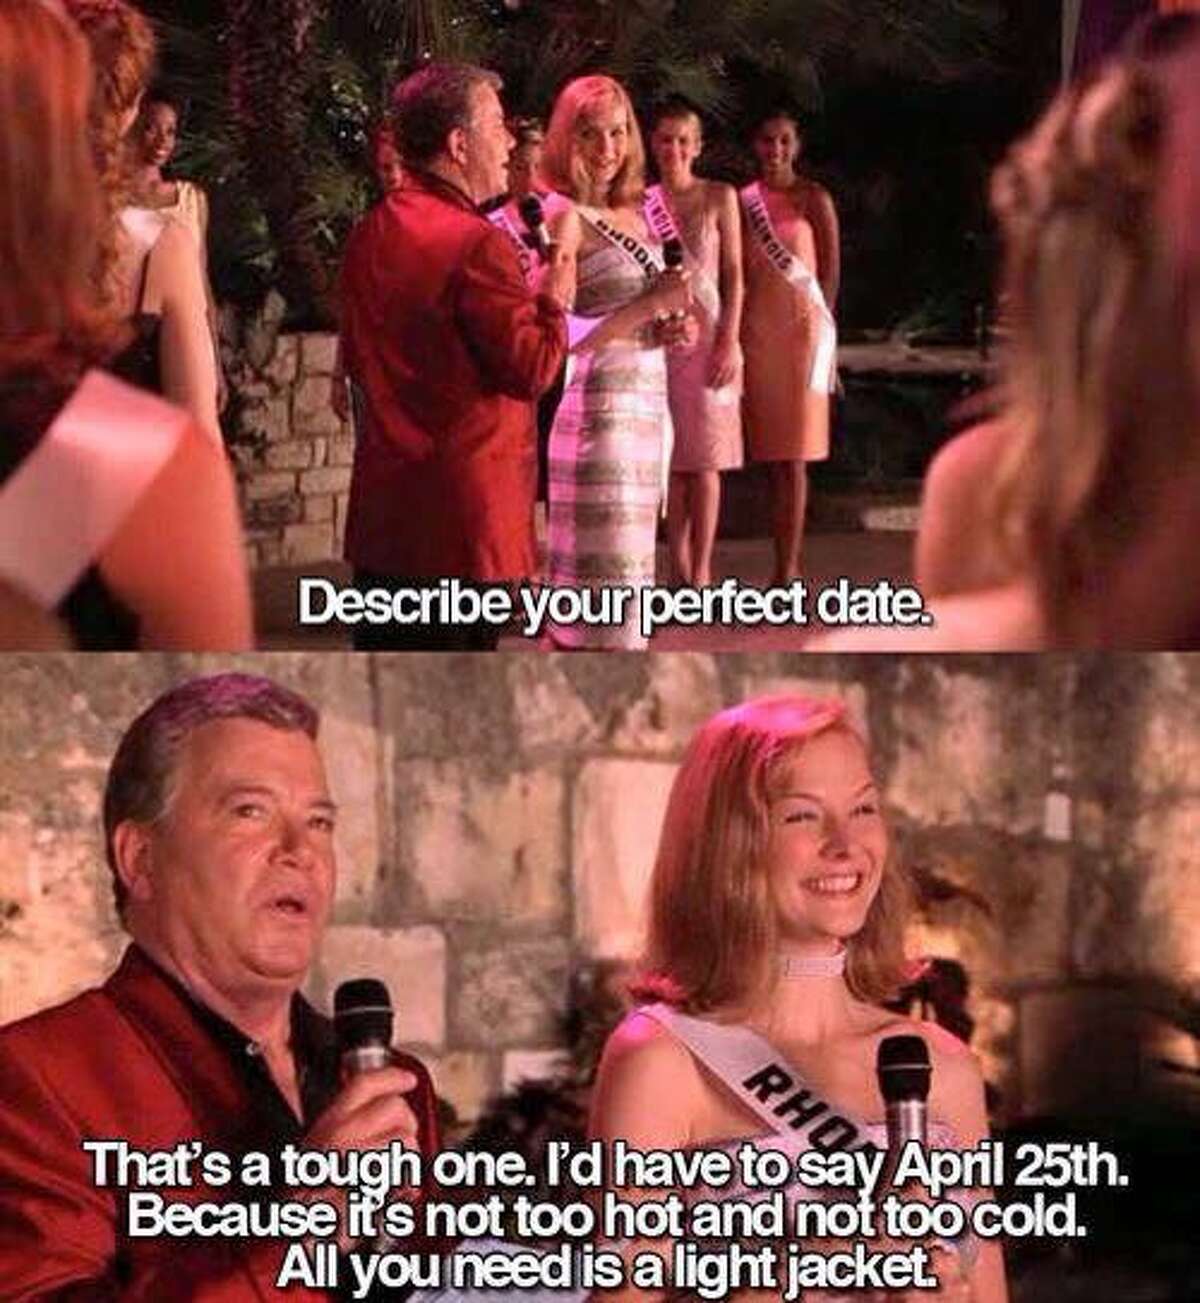 It's April 25, which means it's the 'perfect date'